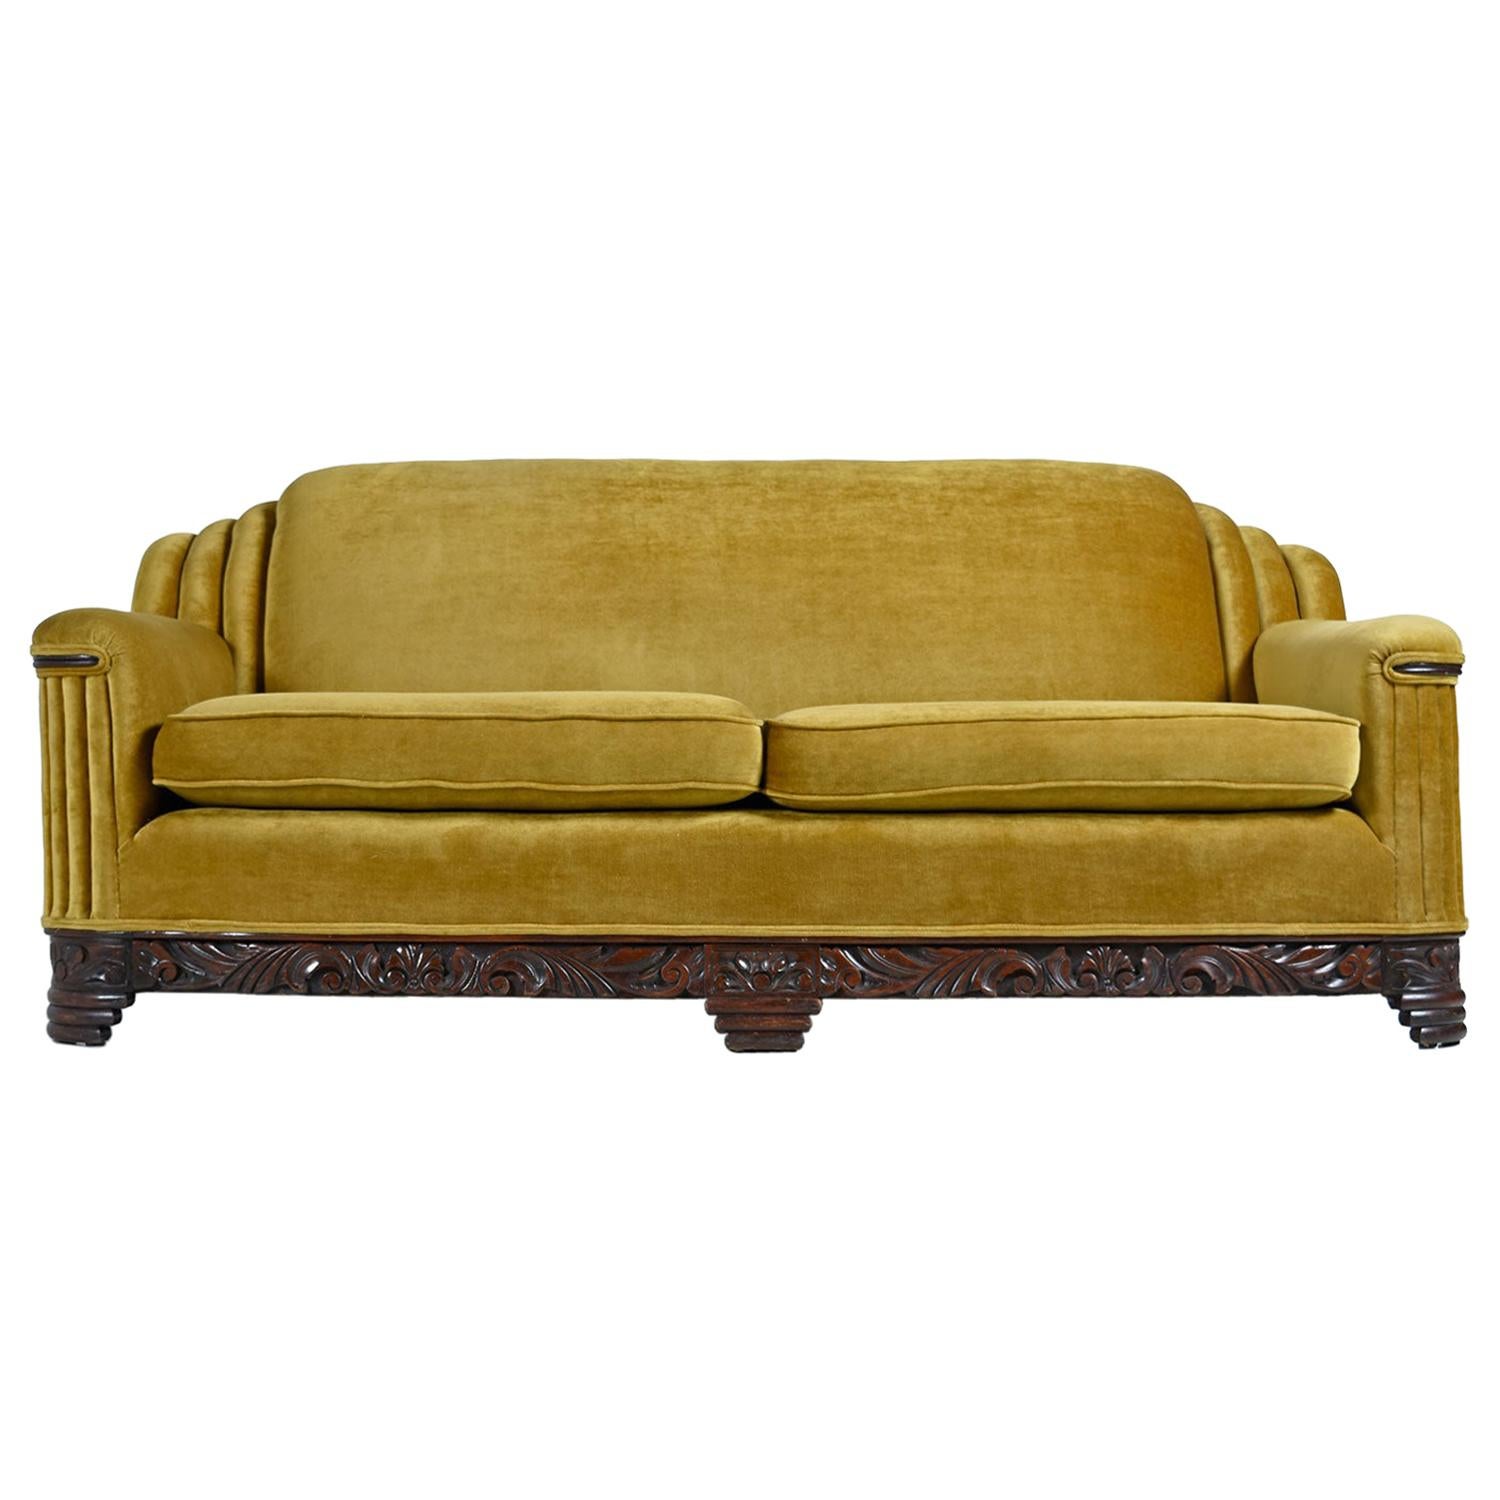 The soft and sensuous gold bronze mohair is in absolutely outstanding condition. Rippled waterfall style pleated tailoring is punctuated by the hand carved mahogany base and accents on the arms. One does not have to compromise comfort for style with